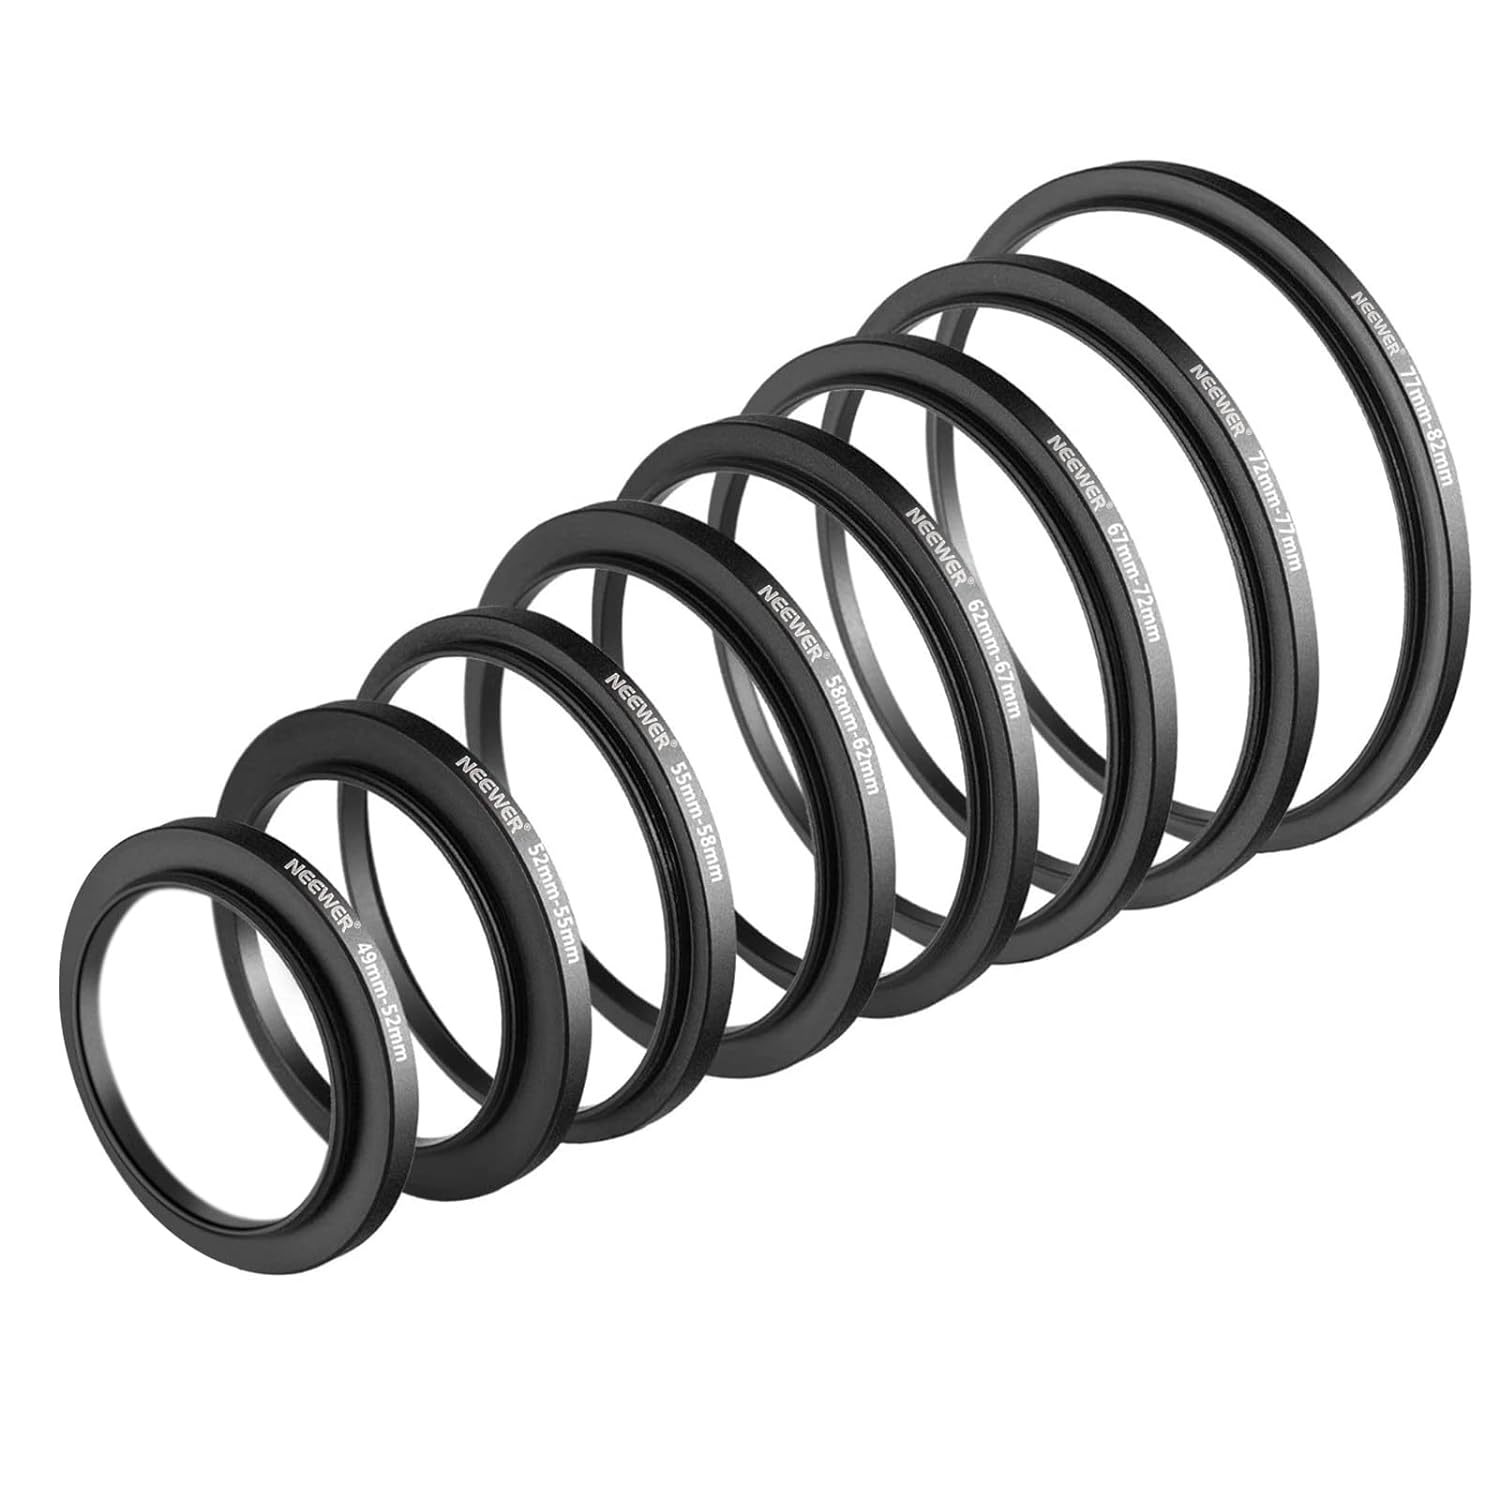 Neewer 8 Pieces Step-up Adapter Ring Set Made of Premium Anodized Aluminum, Incl - $35.14